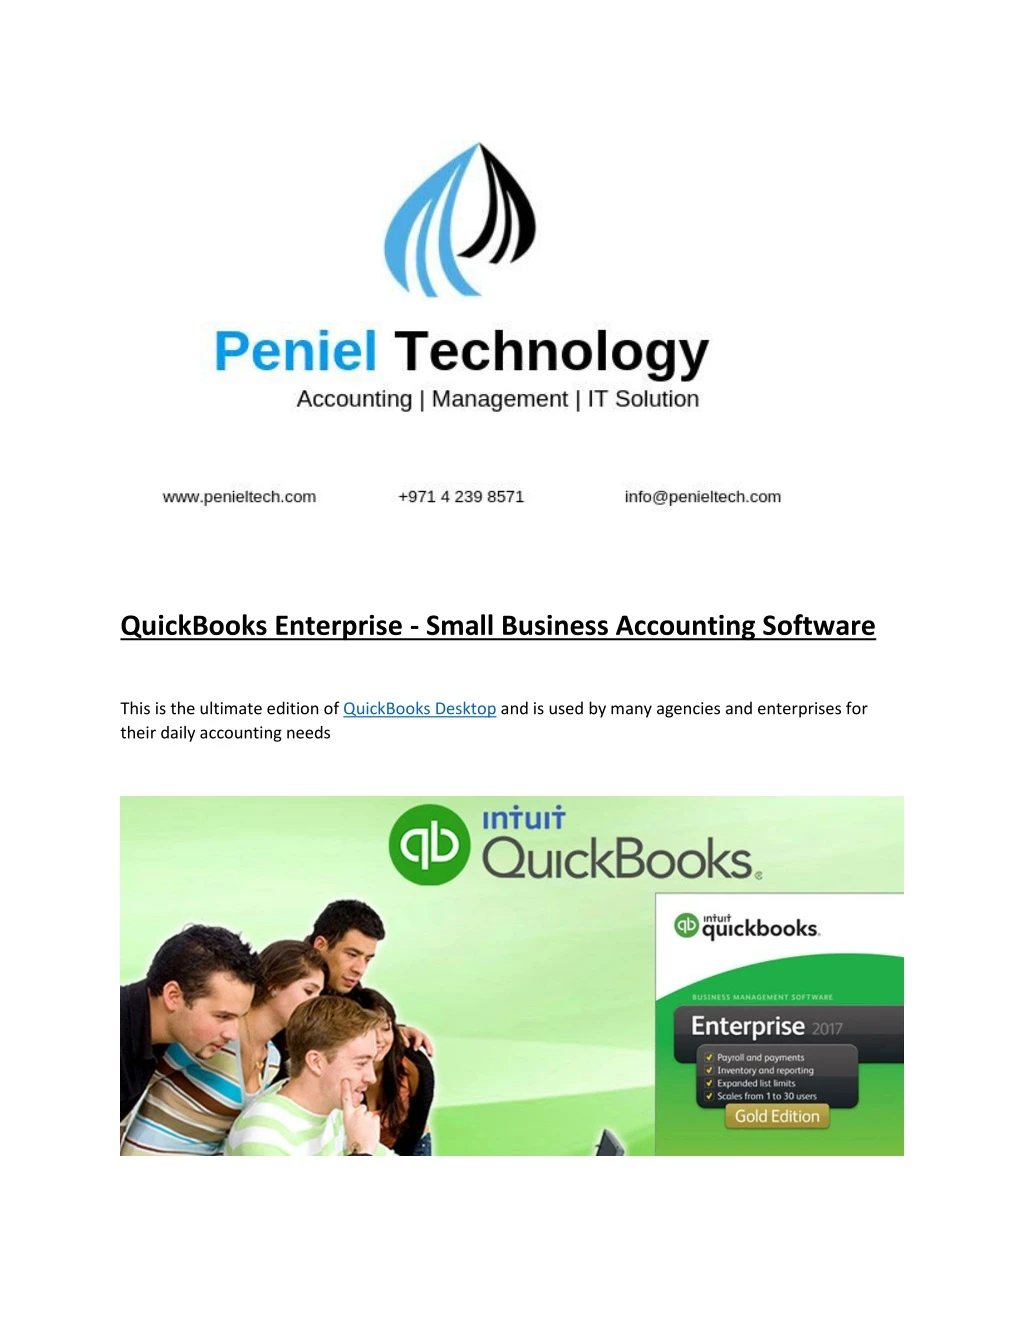 quickbooks enterprise small business accounting